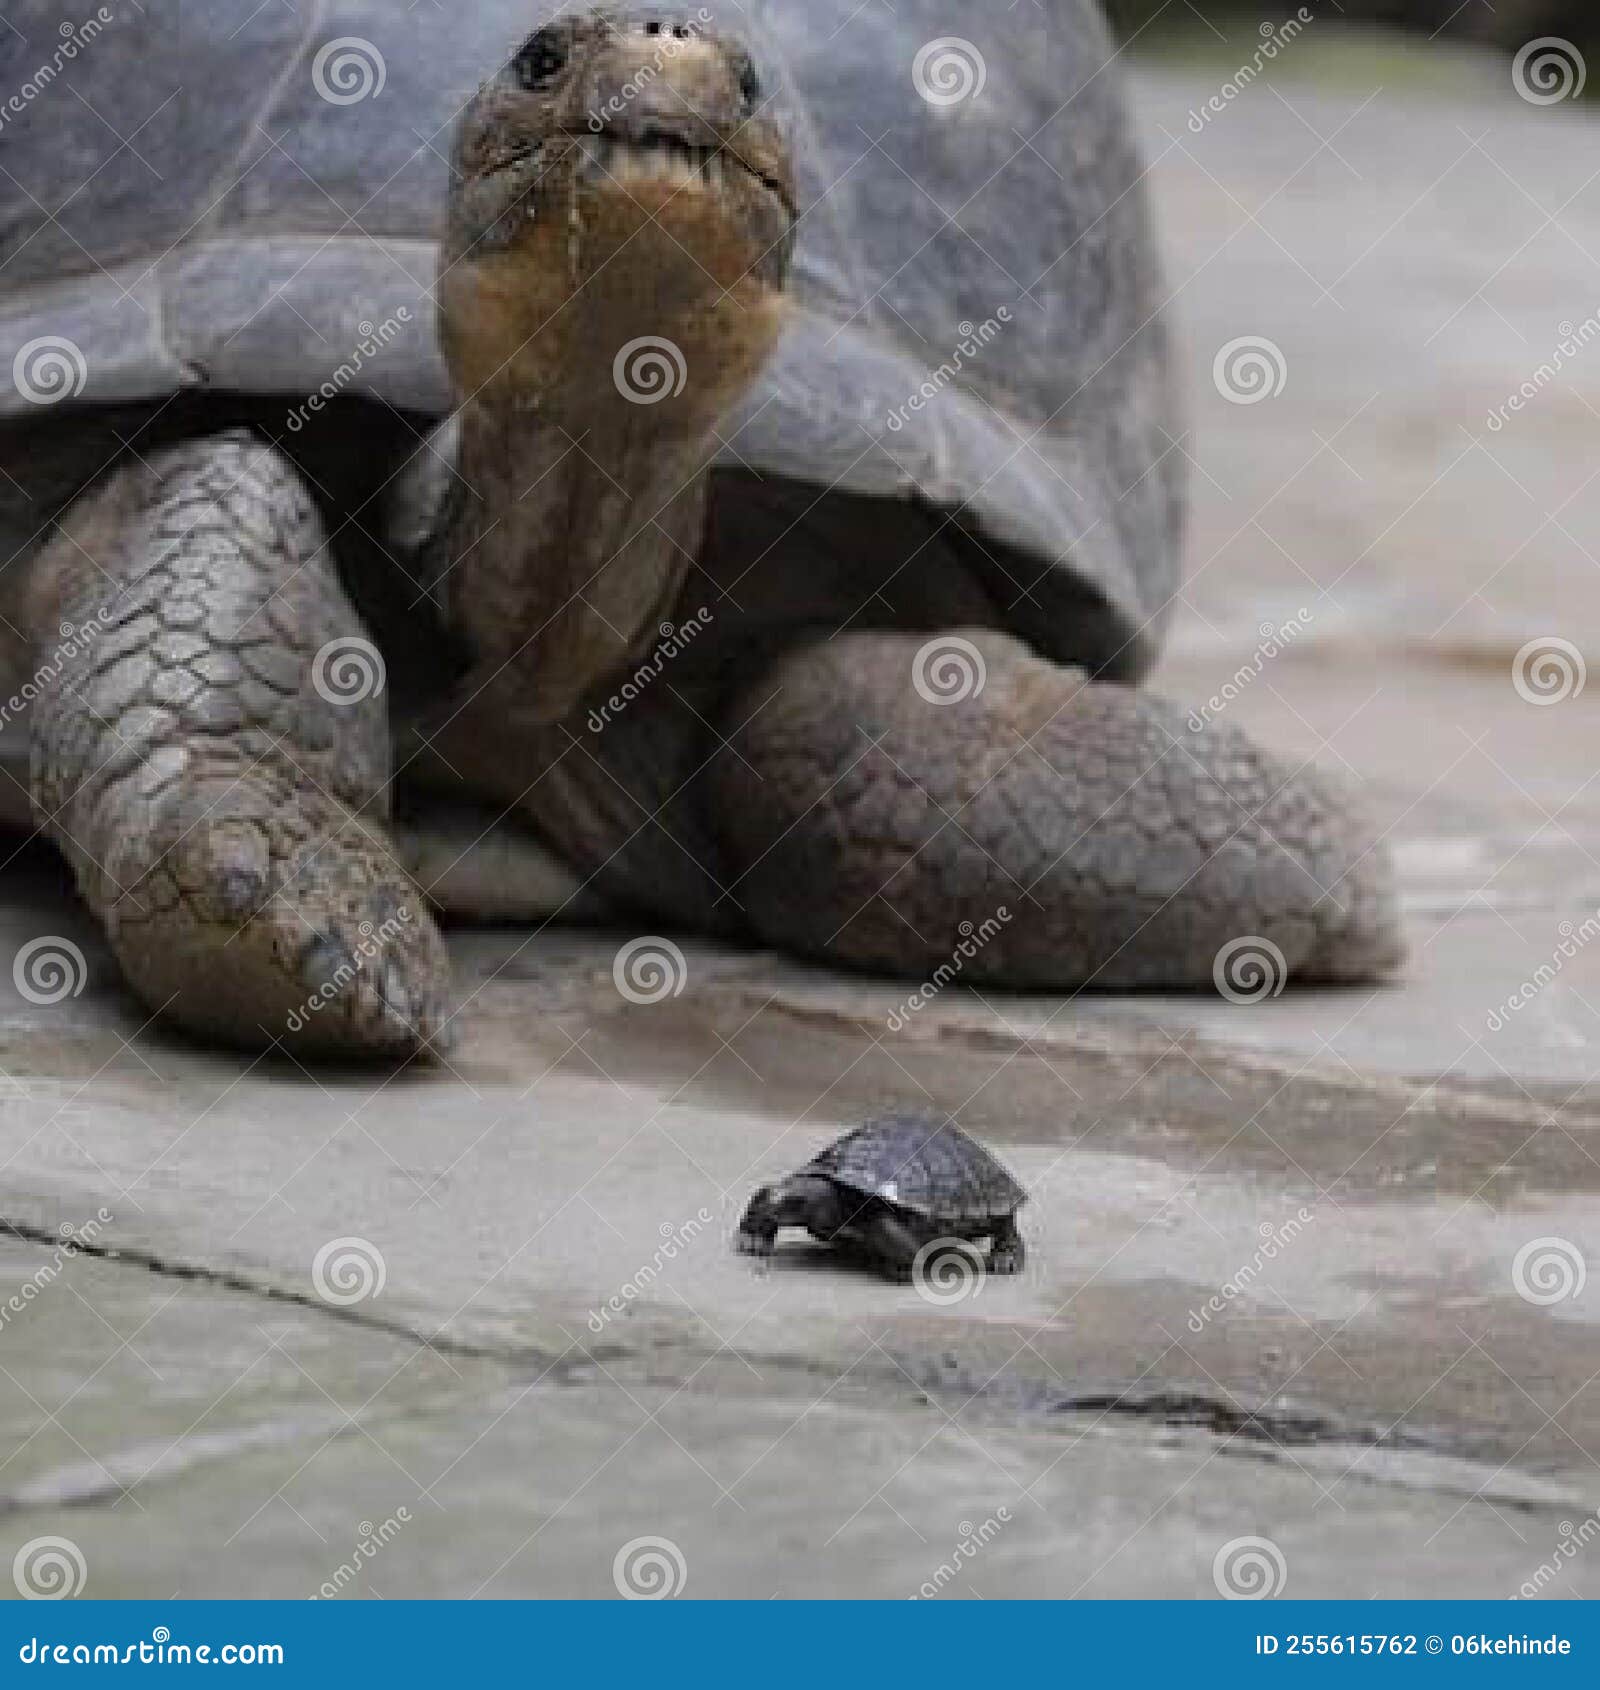 beautiful turtle and the little one interacting